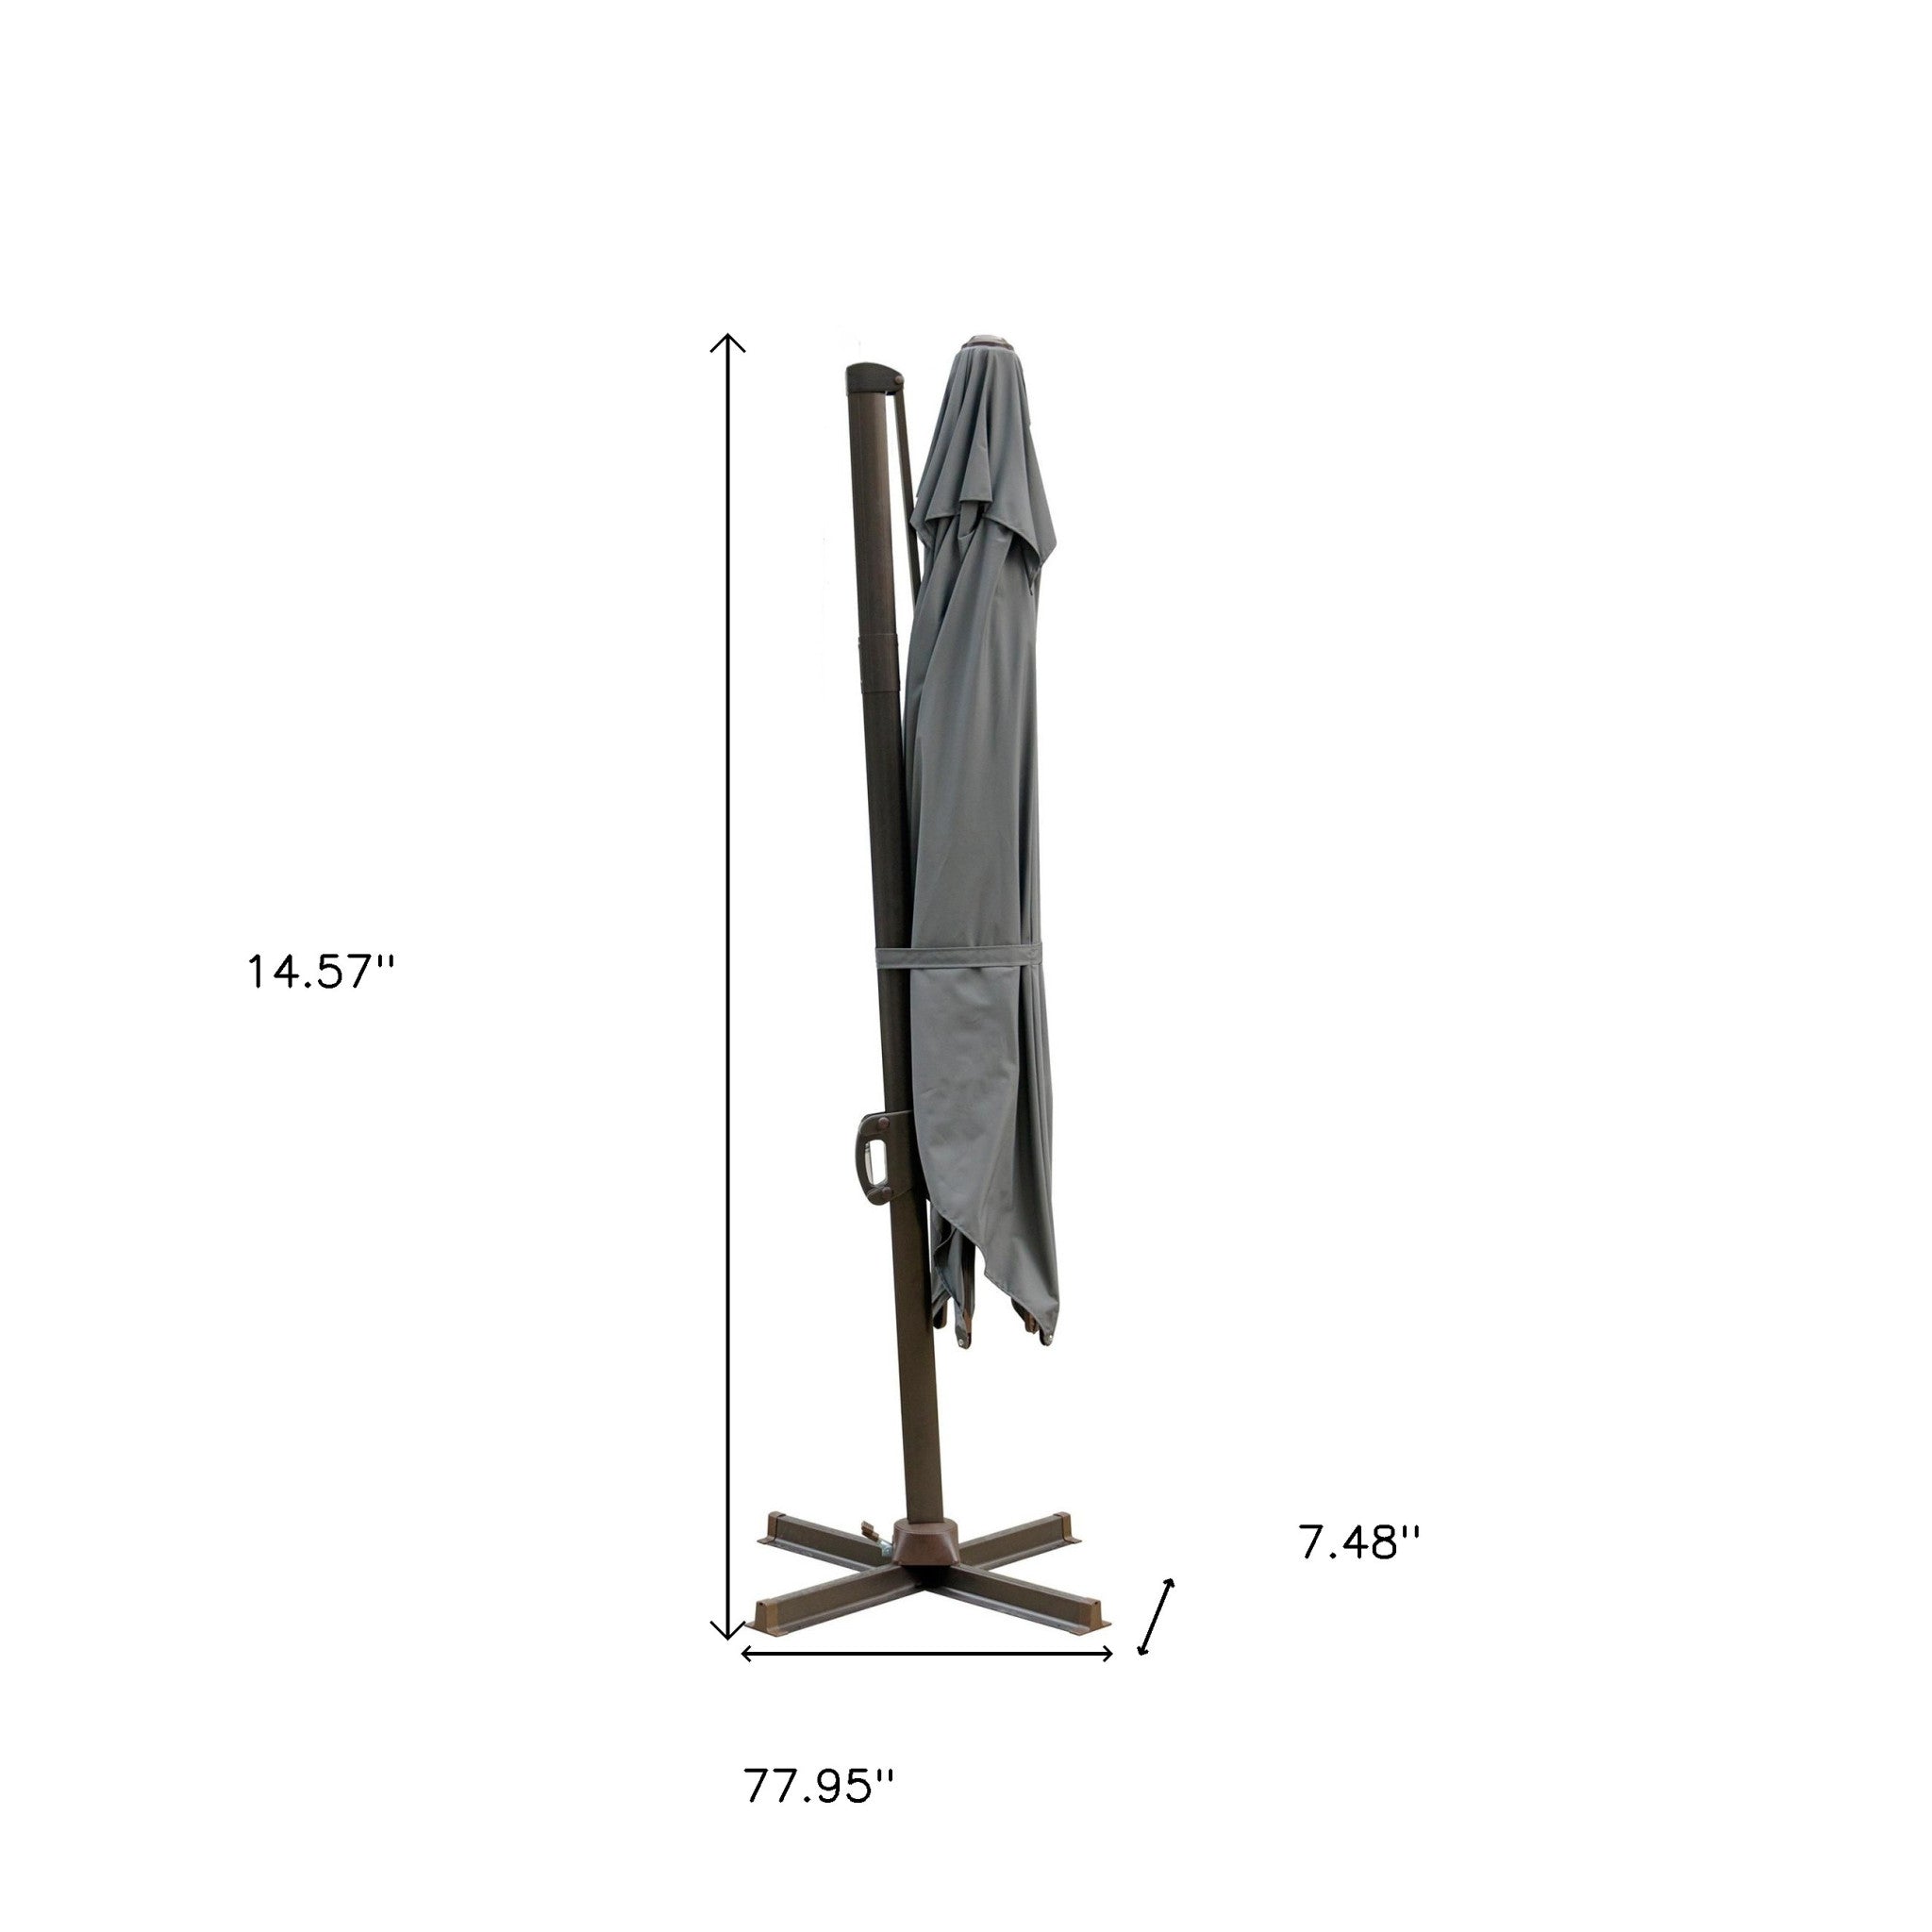 10' Dark Gray Polyester Square Tilt Cantilever Patio Umbrella With Stand